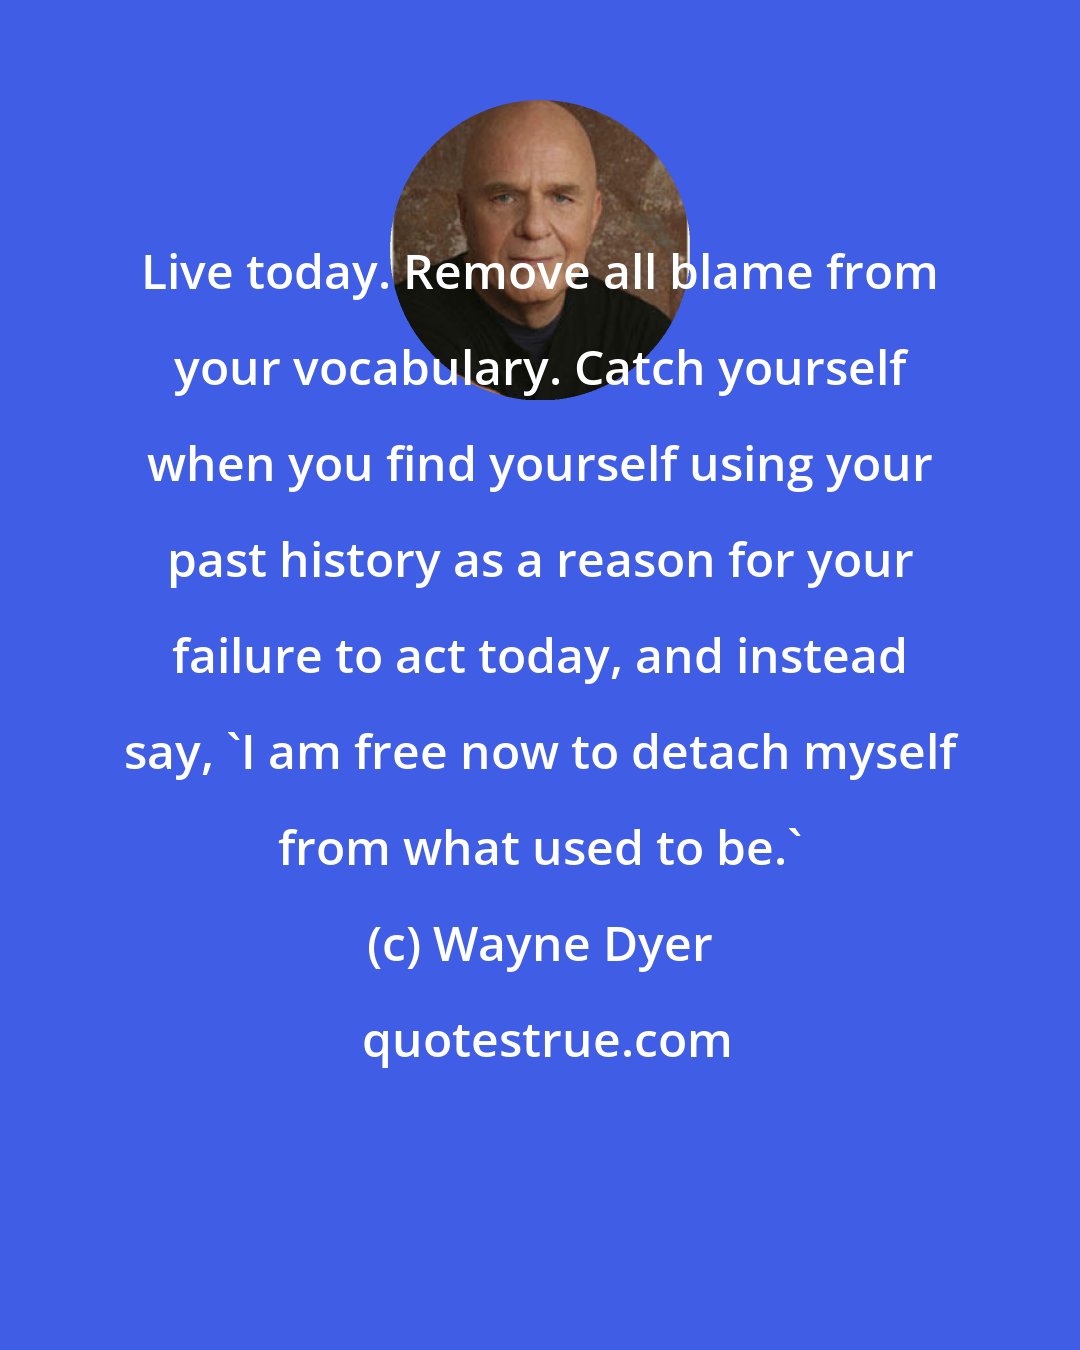 Wayne Dyer: Live today. Remove all blame from your vocabulary. Catch yourself when you find yourself using your past history as a reason for your failure to act today, and instead say, 'I am free now to detach myself from what used to be.'